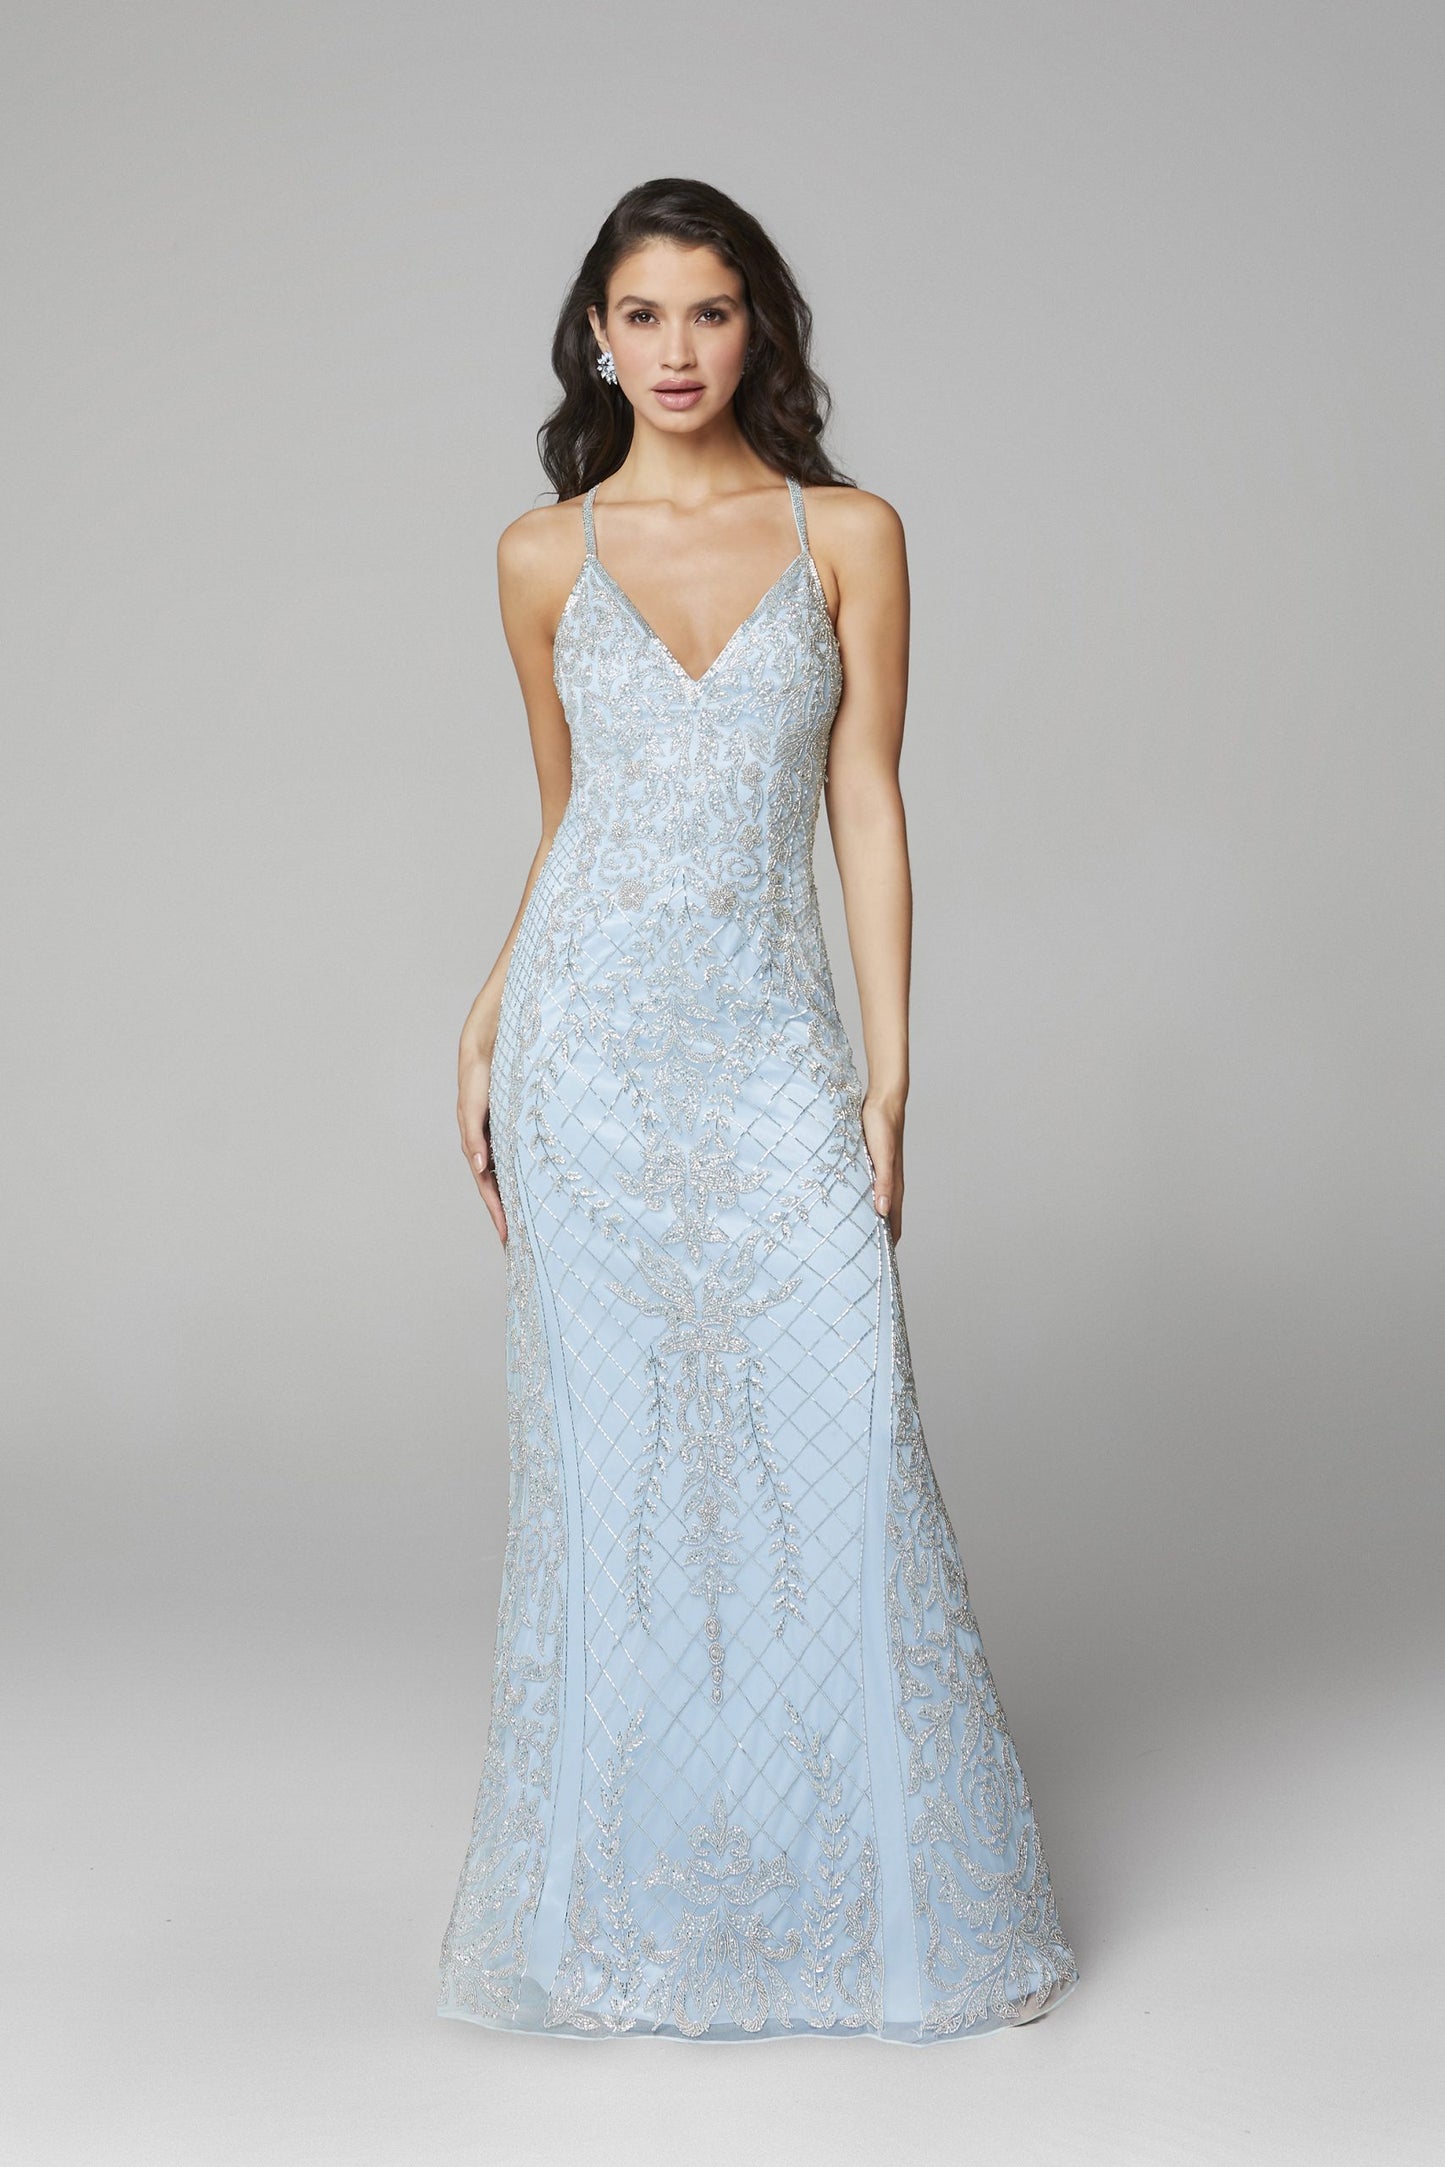 Primavera Couture 3428 is a beaded sequins Prom Dress, Pageant Gown, & Formal Evening Wear gown. This long Gown Features a v neckline with spaghetti straps that criss cross in the open back   Color Powder Blue  Size 8